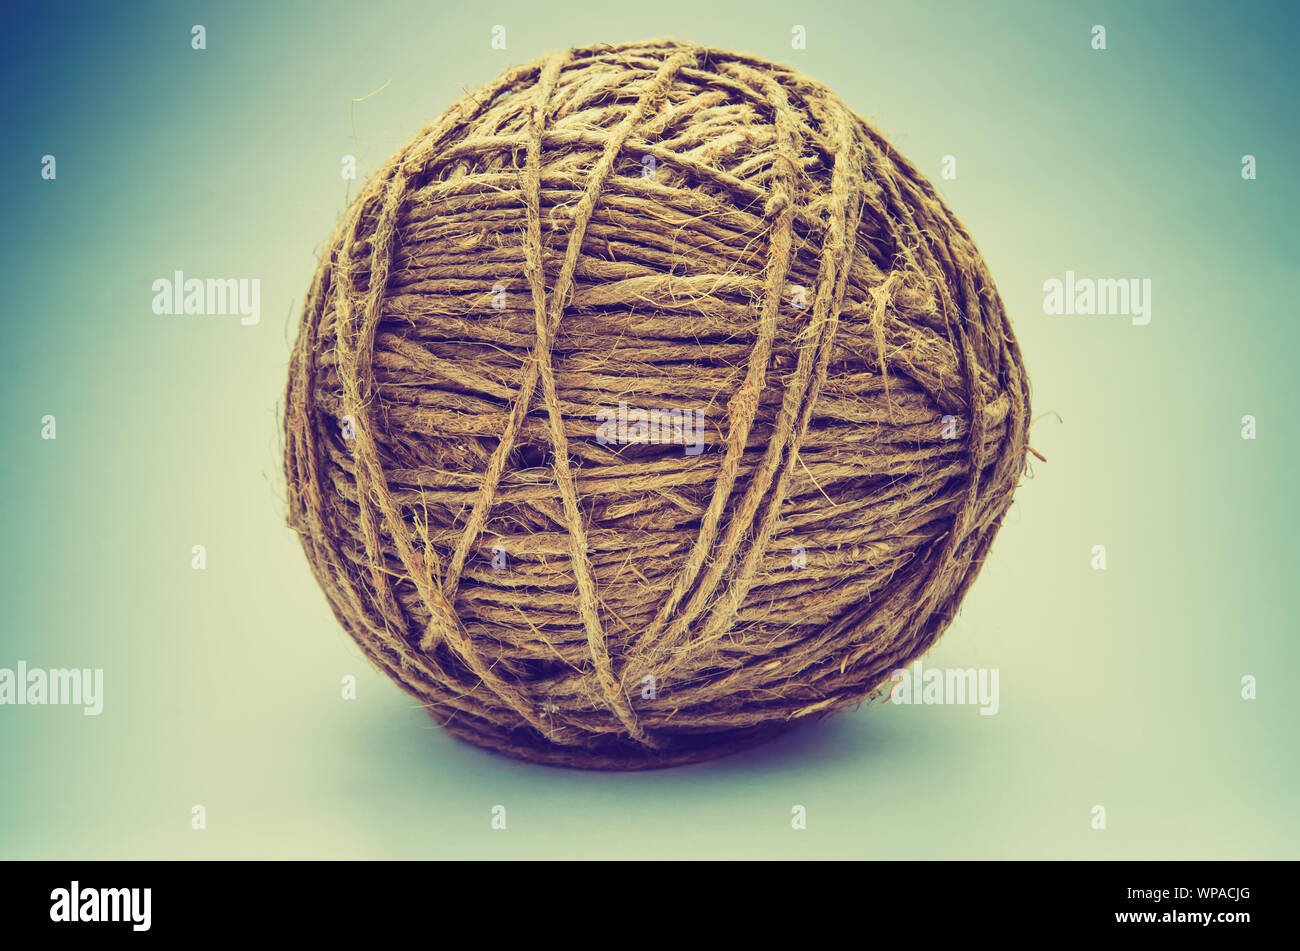 Ball of white string stock photo. Image of string, isolated - 2420002